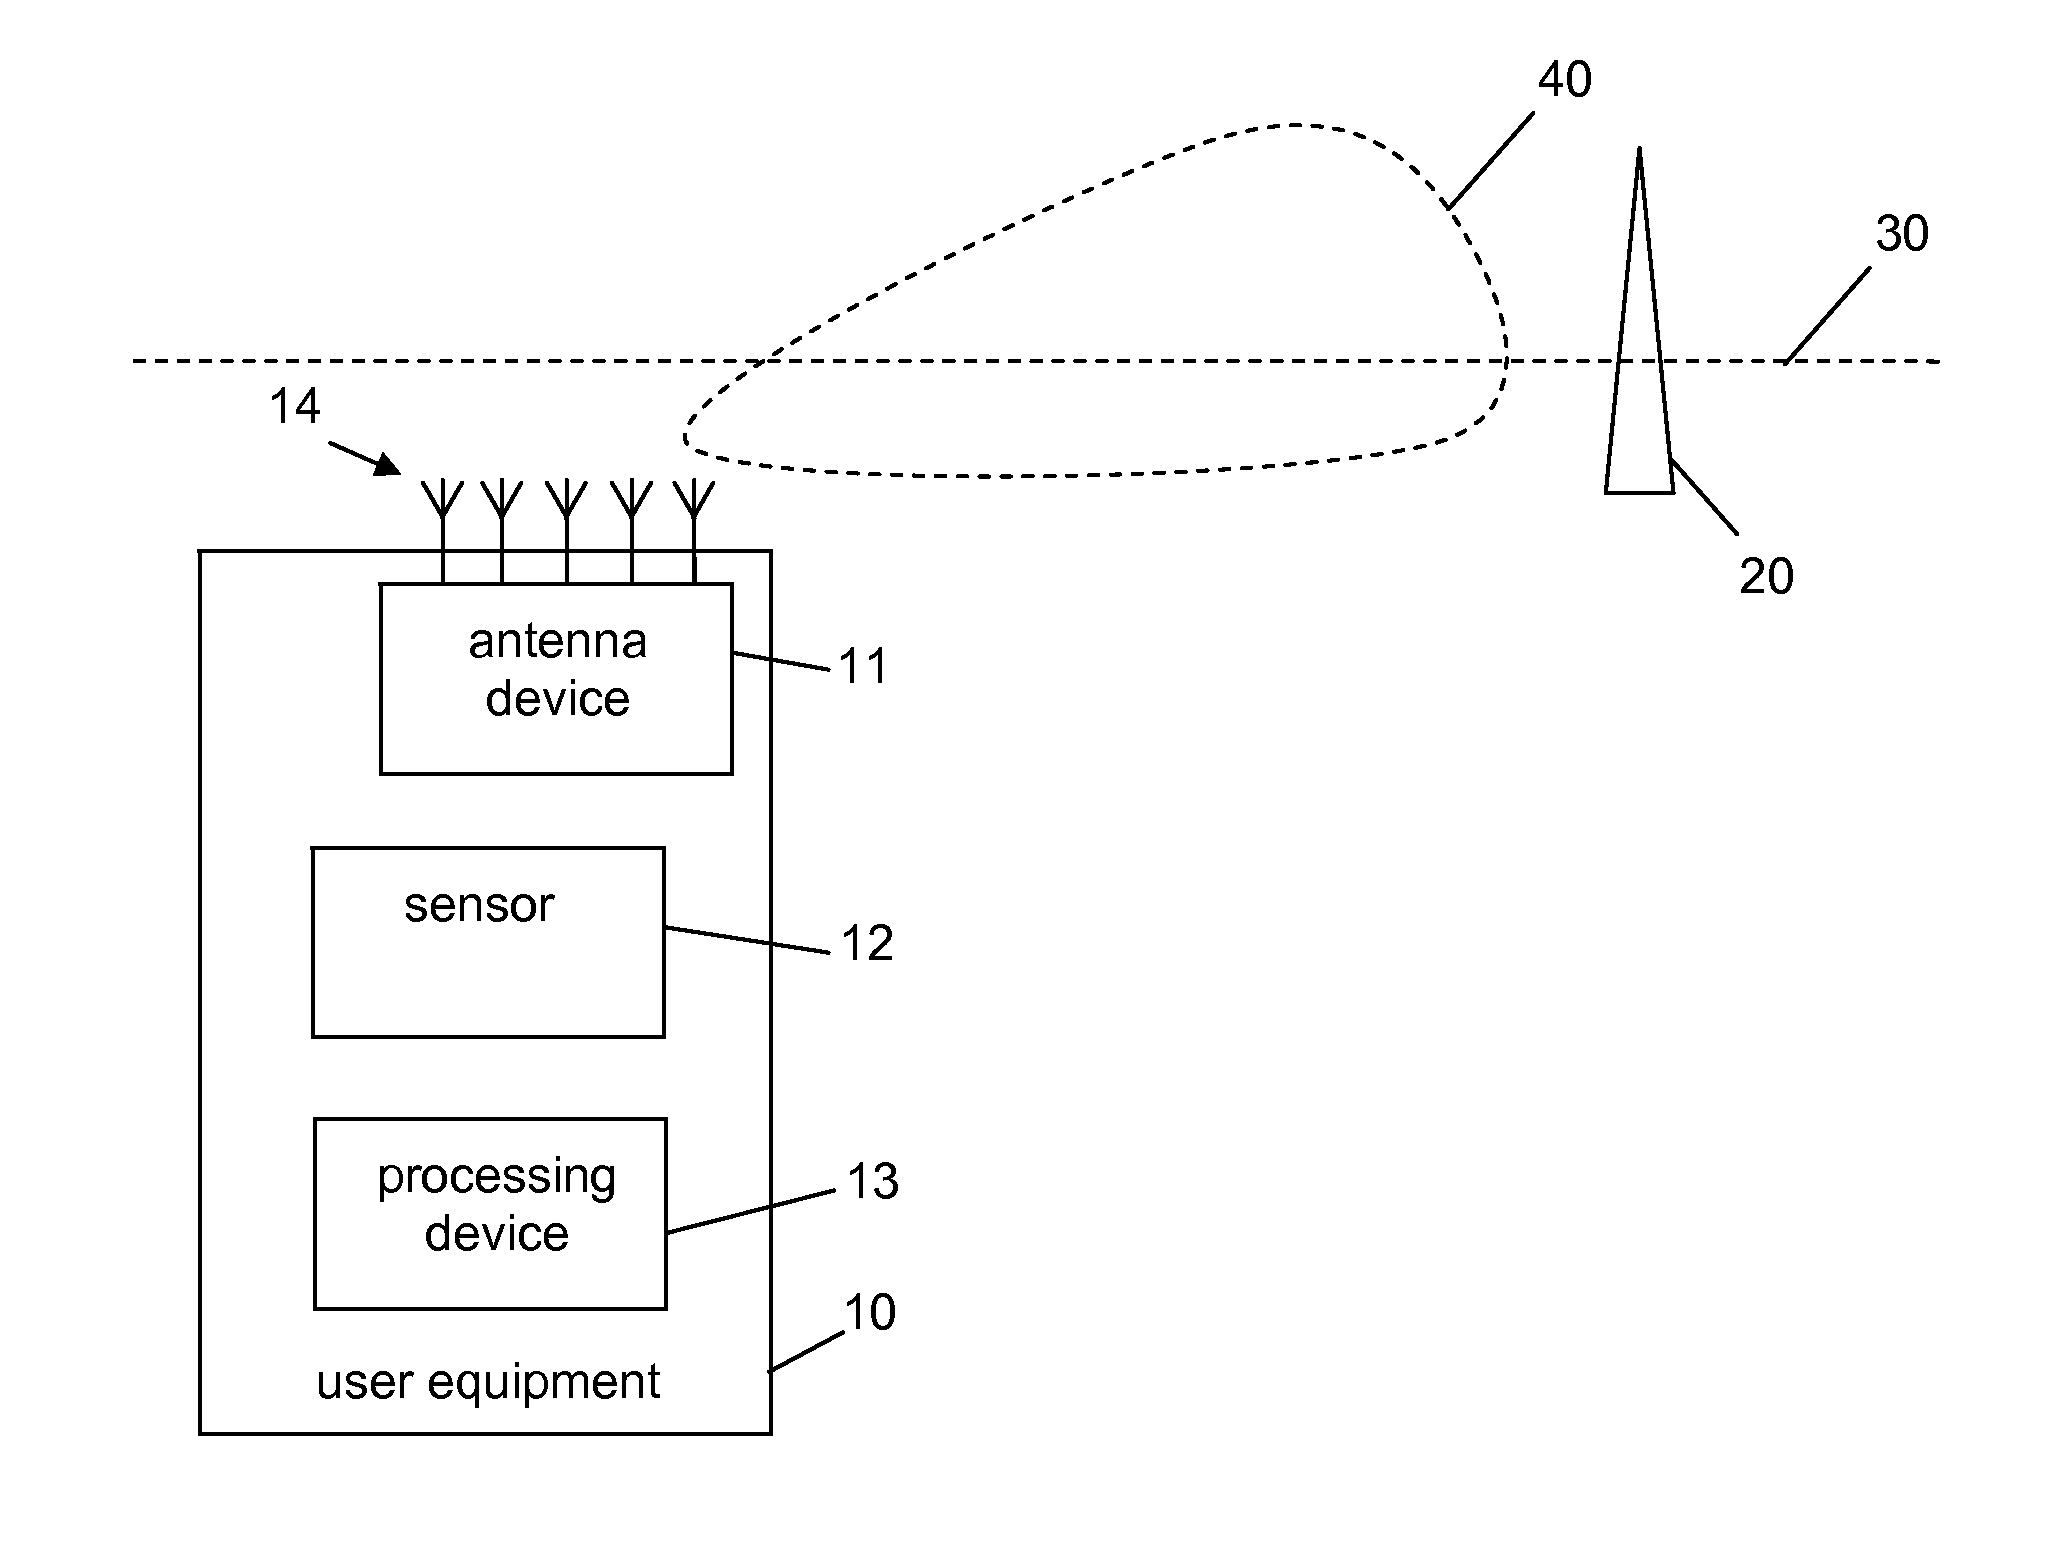 Operating a User Equipment in a Wireless Communication Network